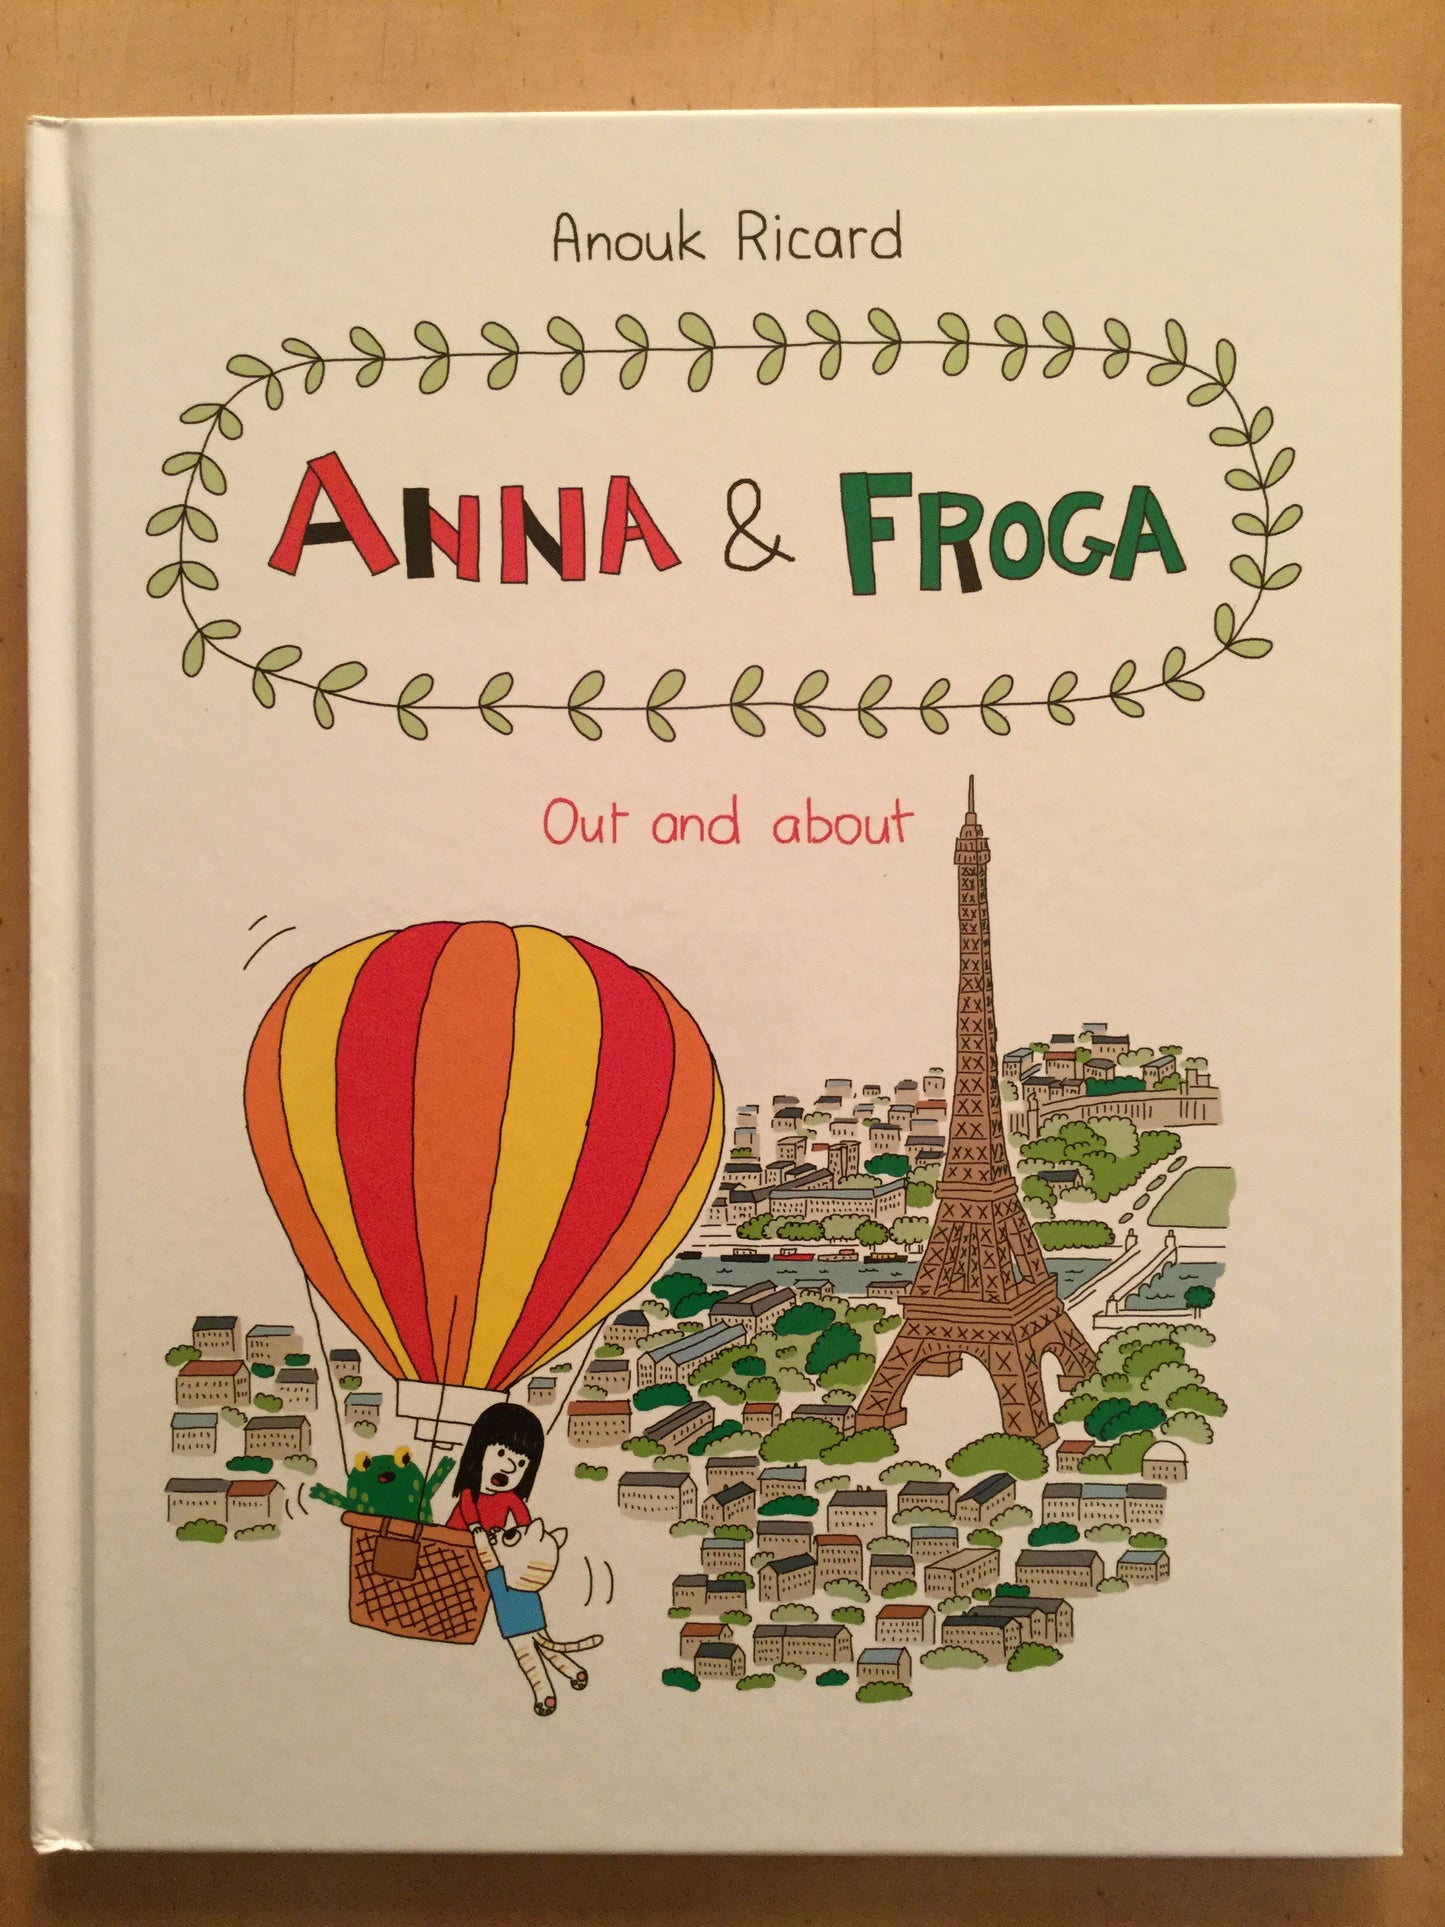 Anna & Froga: Out and about